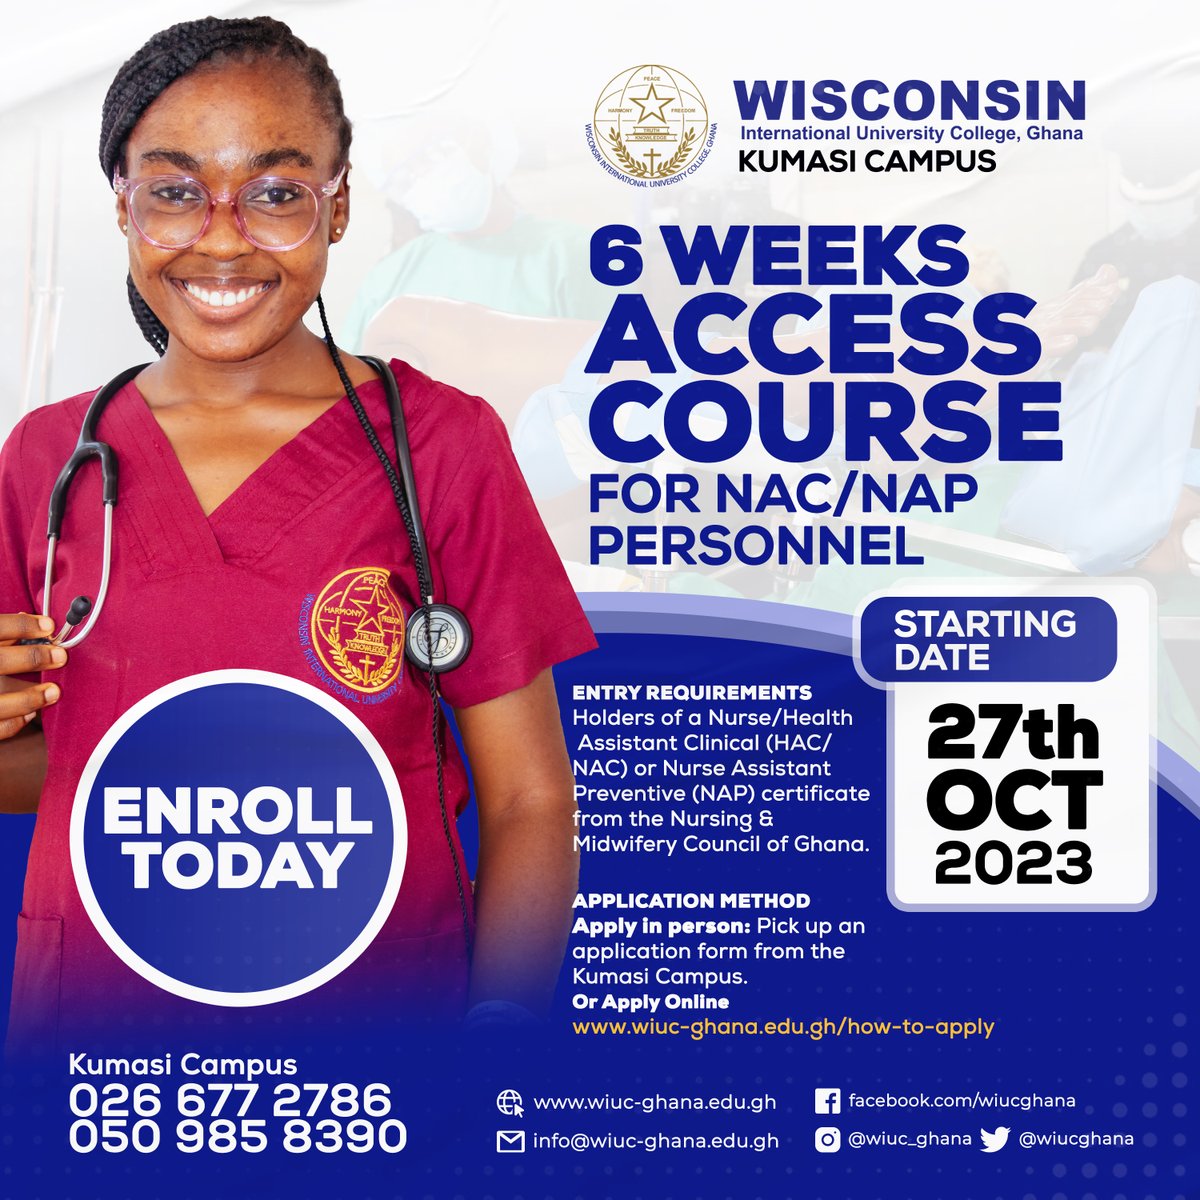 ACCESS COURSE - KUMASI CAMPUS Apply today to our 6-week Access Programme to enroll in our BSc Nursing, Midwifery, or Public Health Nursing come Jan/Feb 2024. Start Date: 27th October wiuc-ghana.edu.gh/how-to-apply #wisconsin #wiucghana #nursing #midwifery #publichealth #access